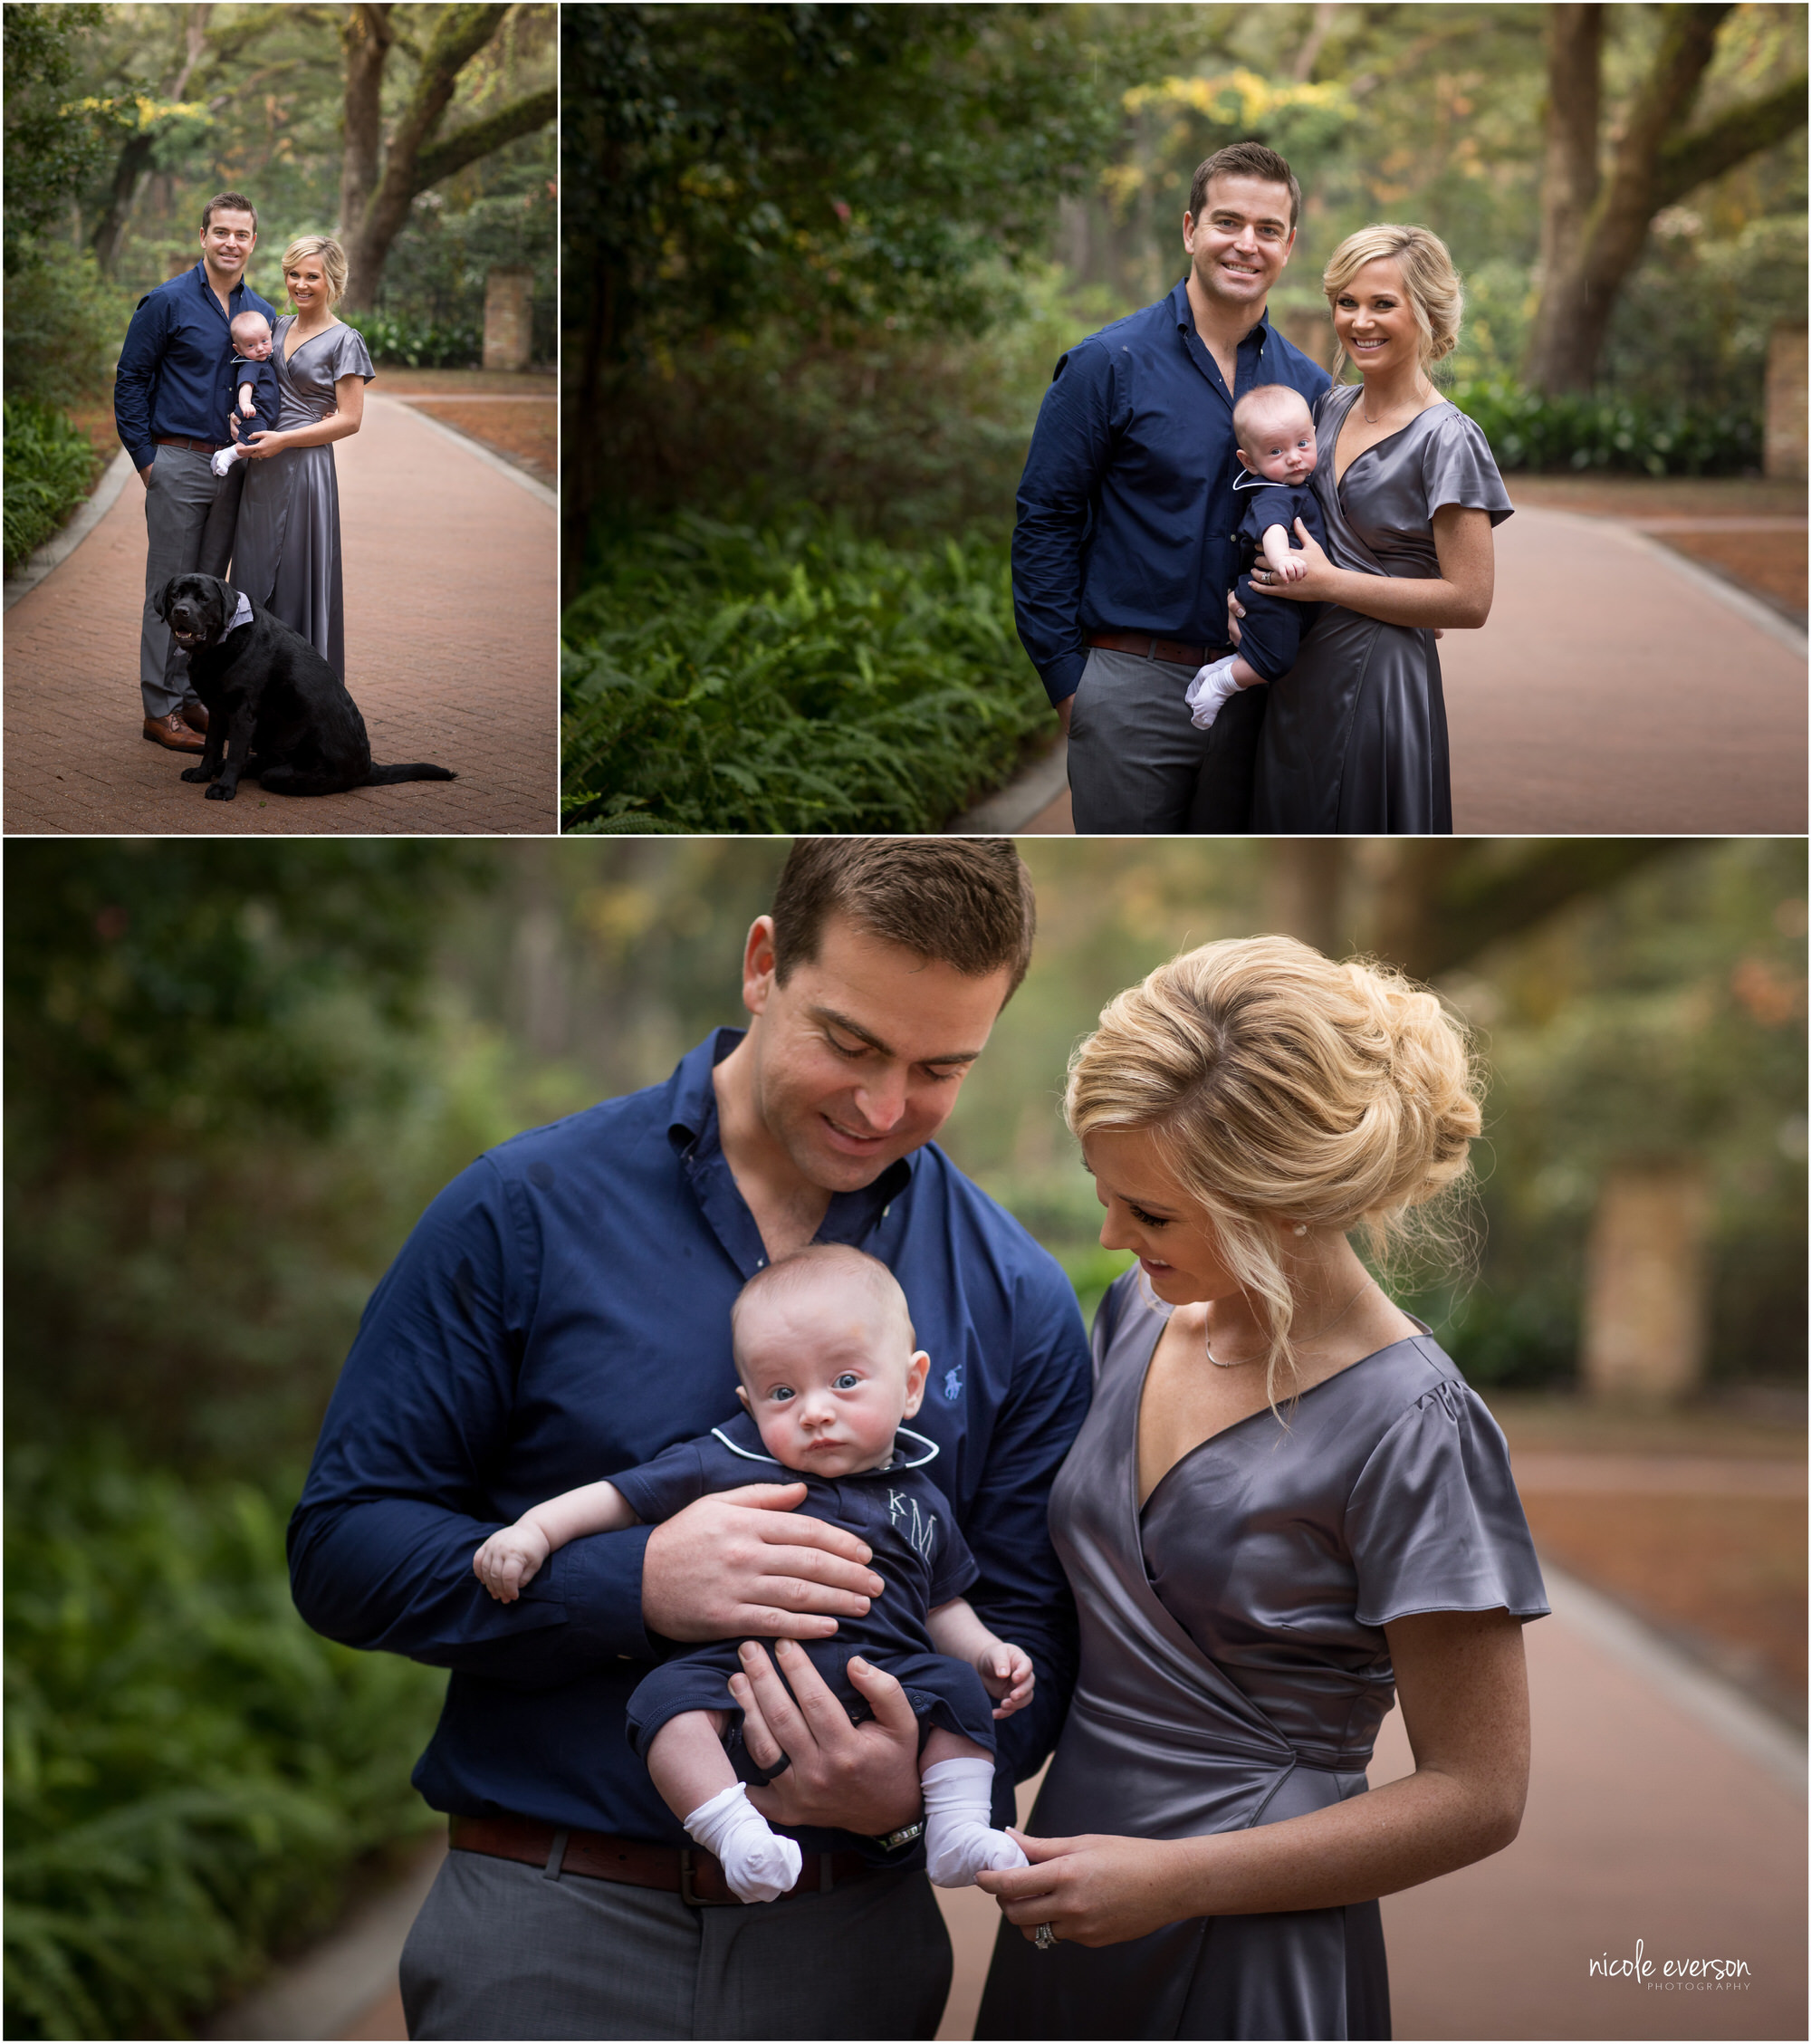 family photography ideas with a baby